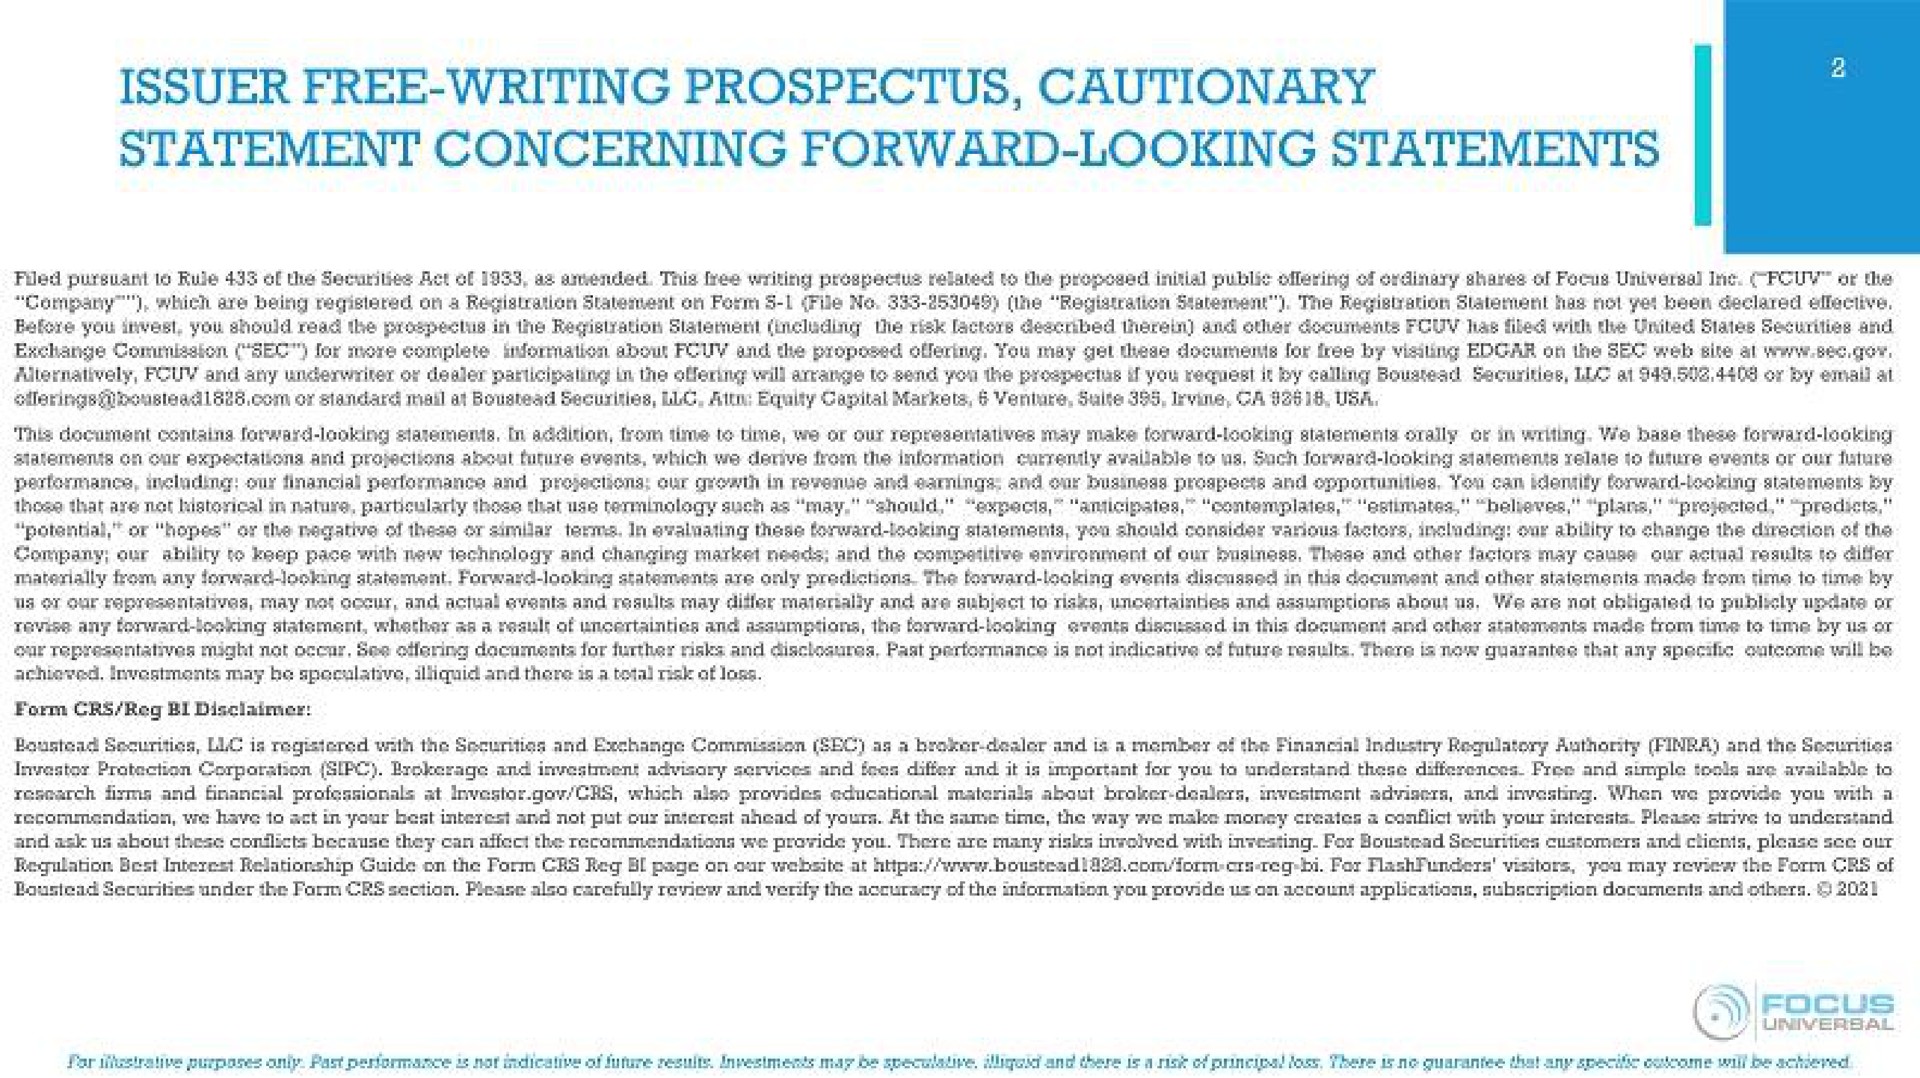 issuer free writing prospectus cautionary statement concerning forward looking statements focus | Focus Universal